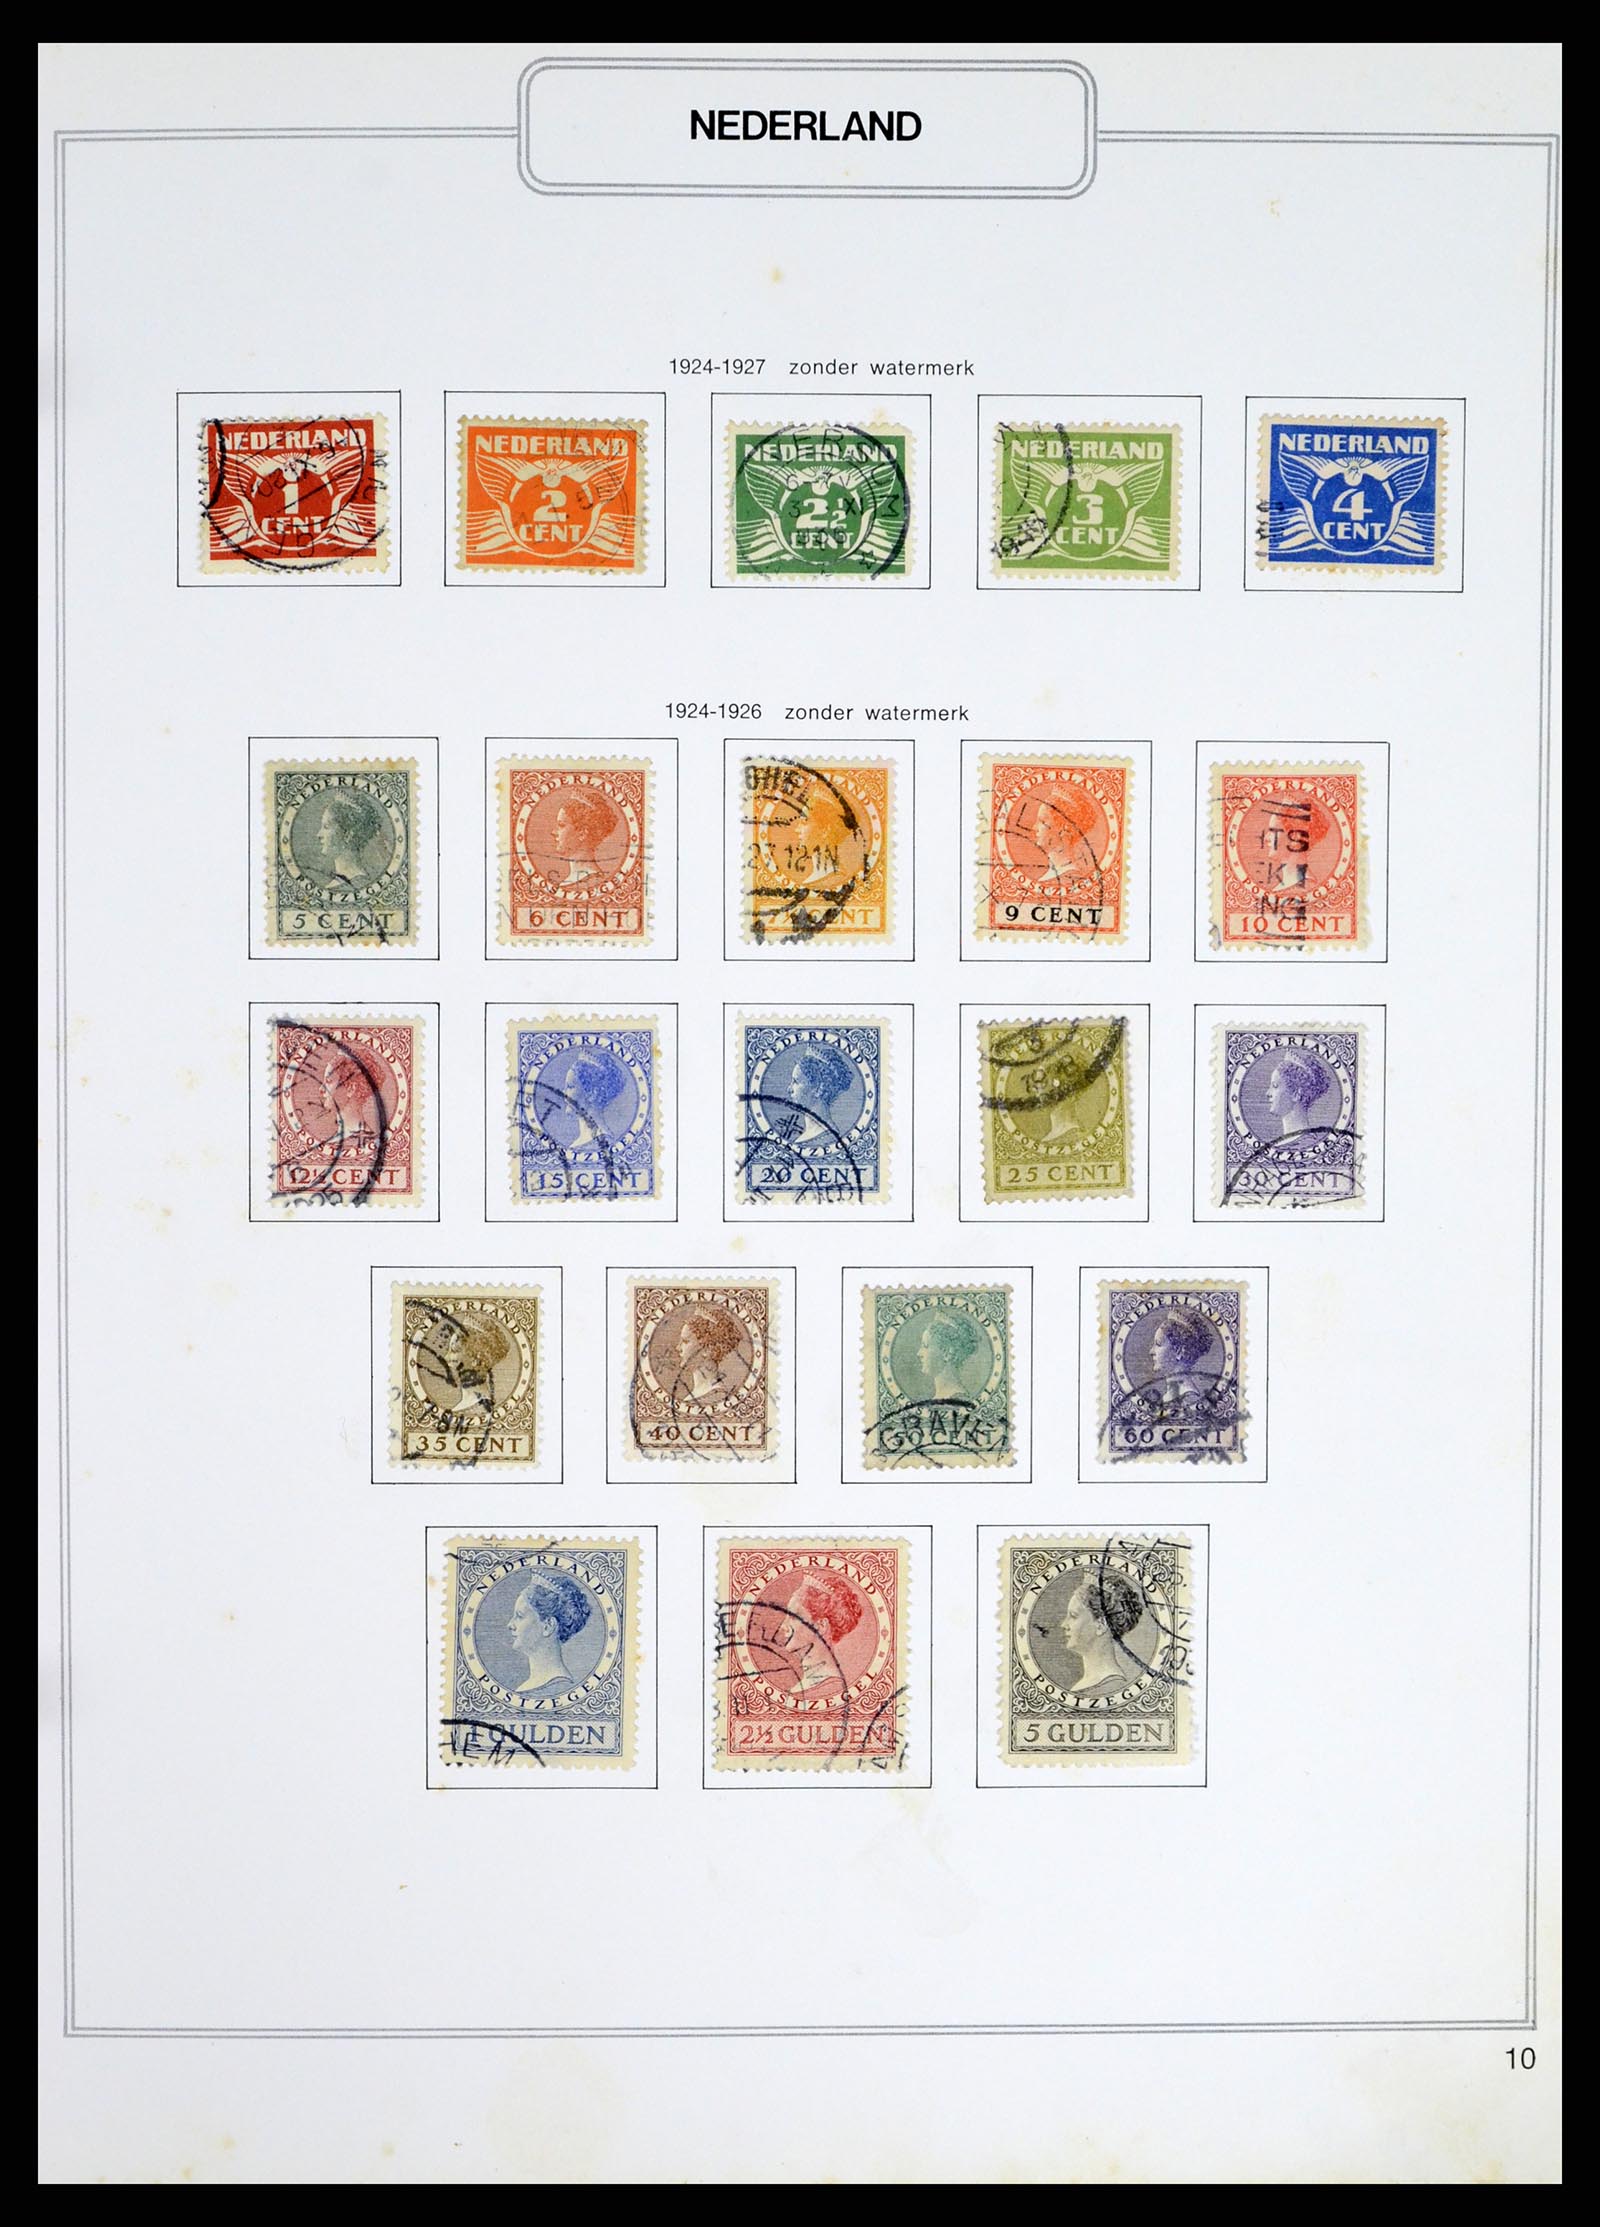 37348 010 - Stamp collection 37348 Netherlands 1852-1995.